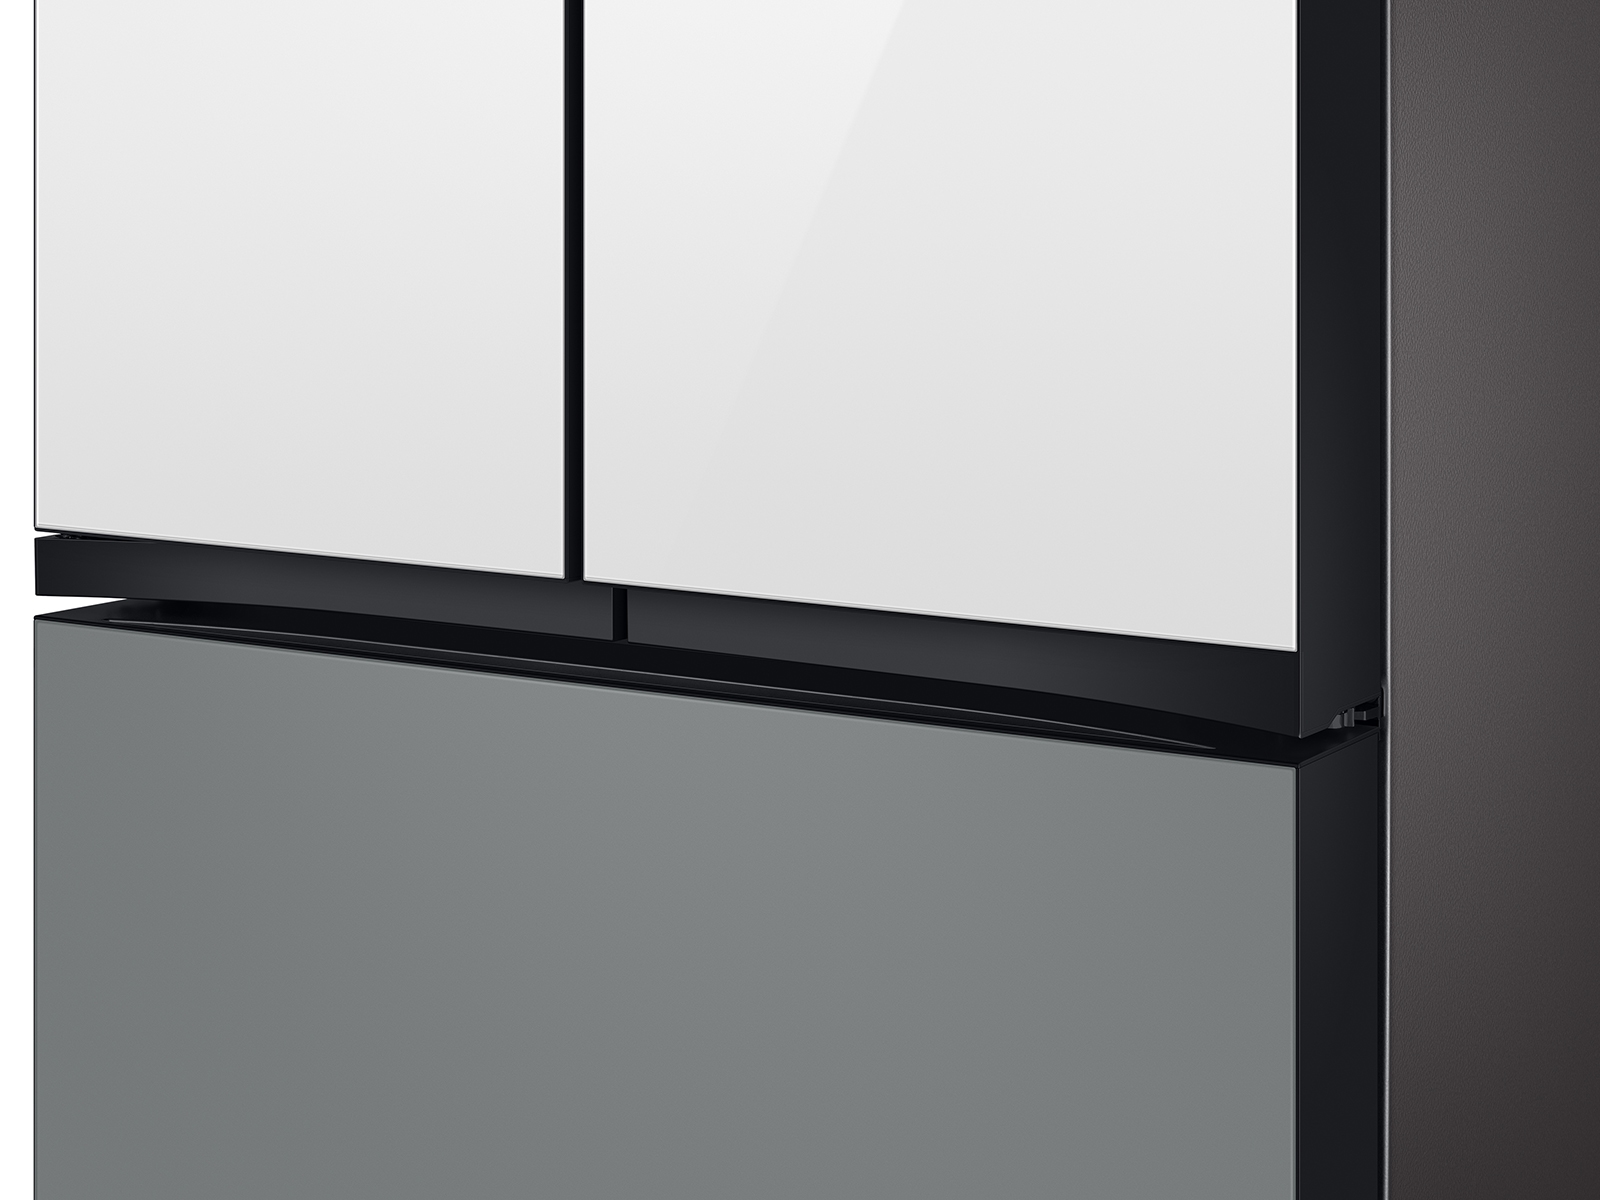 Thumbnail image of Bespoke 3-Door French Door Refrigerator (30 cu. ft.) &ndash; with Top Left and Family Hub&trade; Panel in White Glass - and Matte Grey Glass Bottom Door Panel